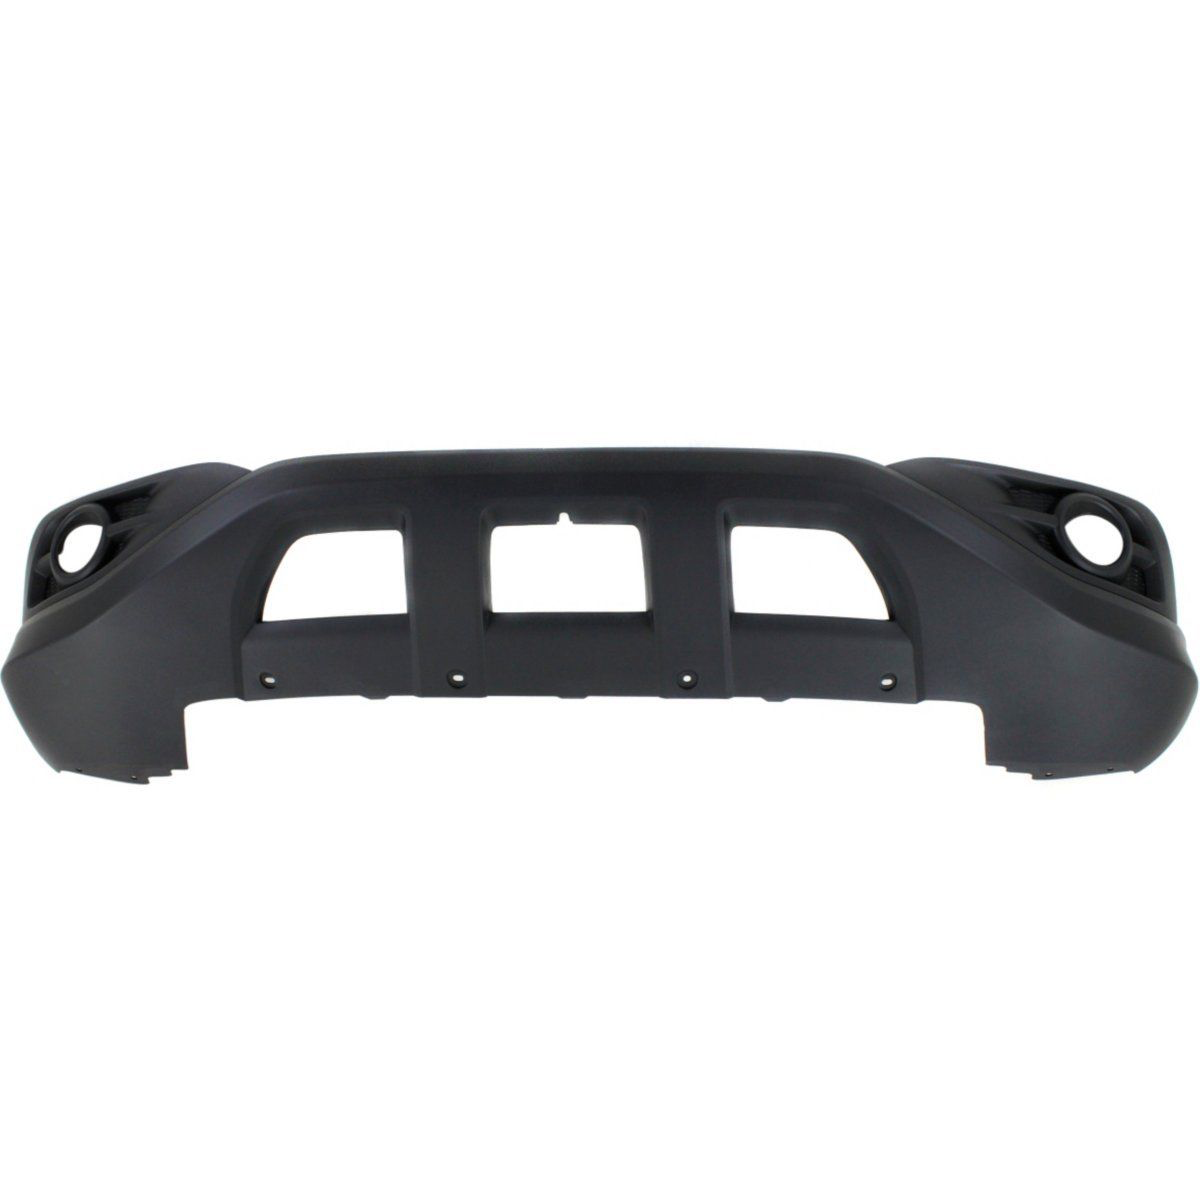 2012-2014 HONDA CR-V Front Bumper Cover Lower EX|EX-L Painted to Match